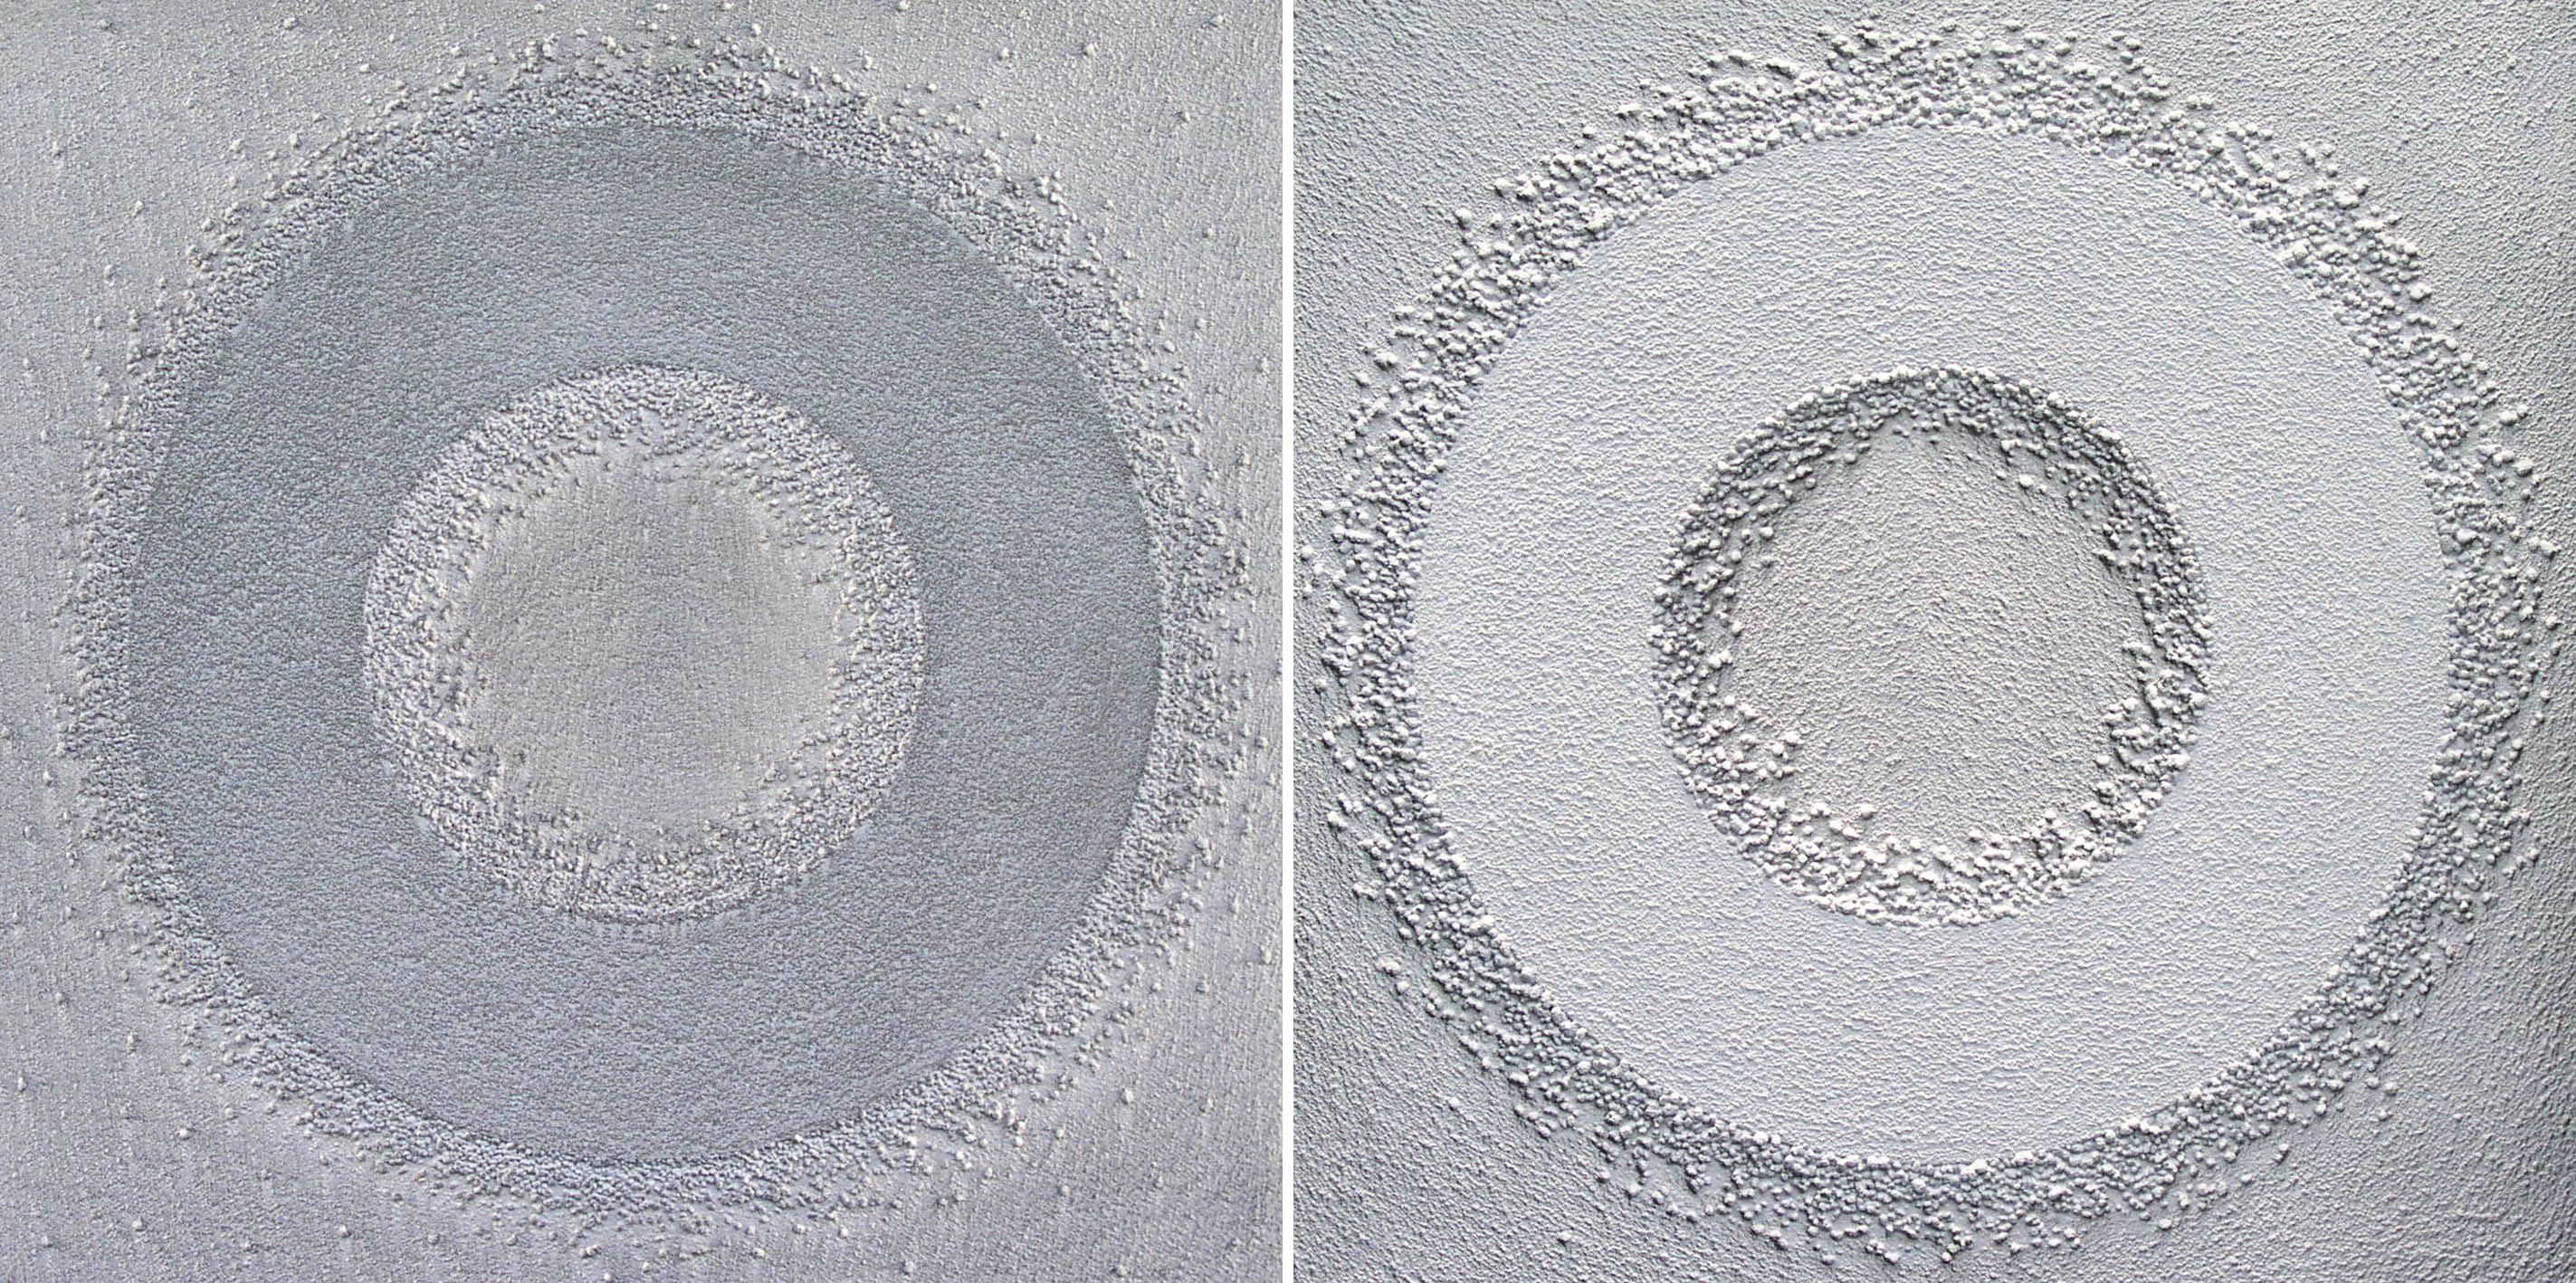 Martha Winter Abstract Painting - "Light and Dark Raised Rings". Contemporary Mixed Media Diptych